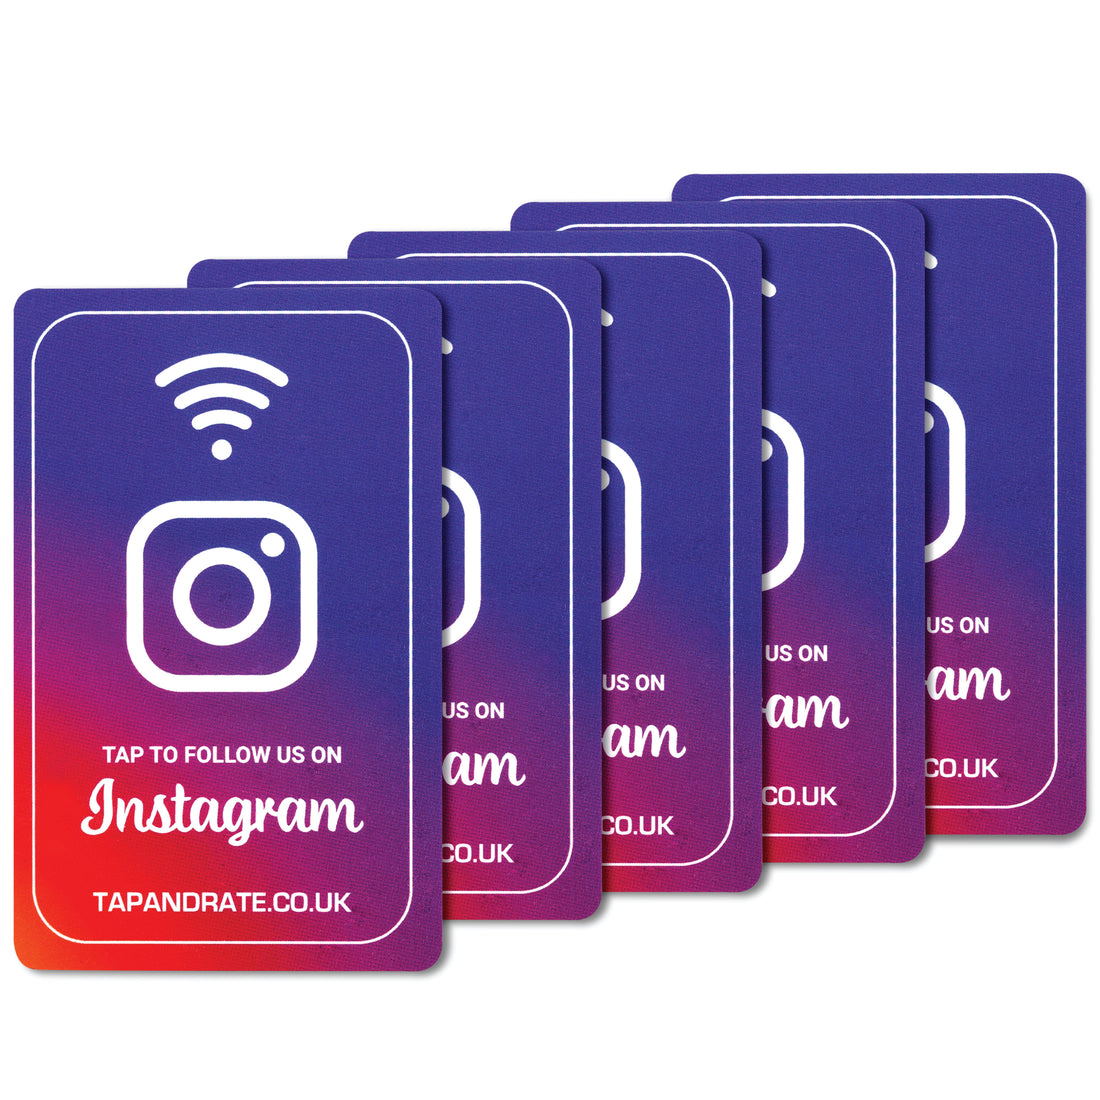 Smart Instagram Card x 5 - Instagram Super Bundle - NFC Enabled Instagram Followers card. Best chip, premium quality. Customers can follow you and see your profile with just one simple tap. No searching or finding your account, comes linked to your account so all the customer has to do is tap their phone and follow your profile. Ready to use out of the box! Start getting more followers today. Get more Customer with this simple to use product. Tap and Rate